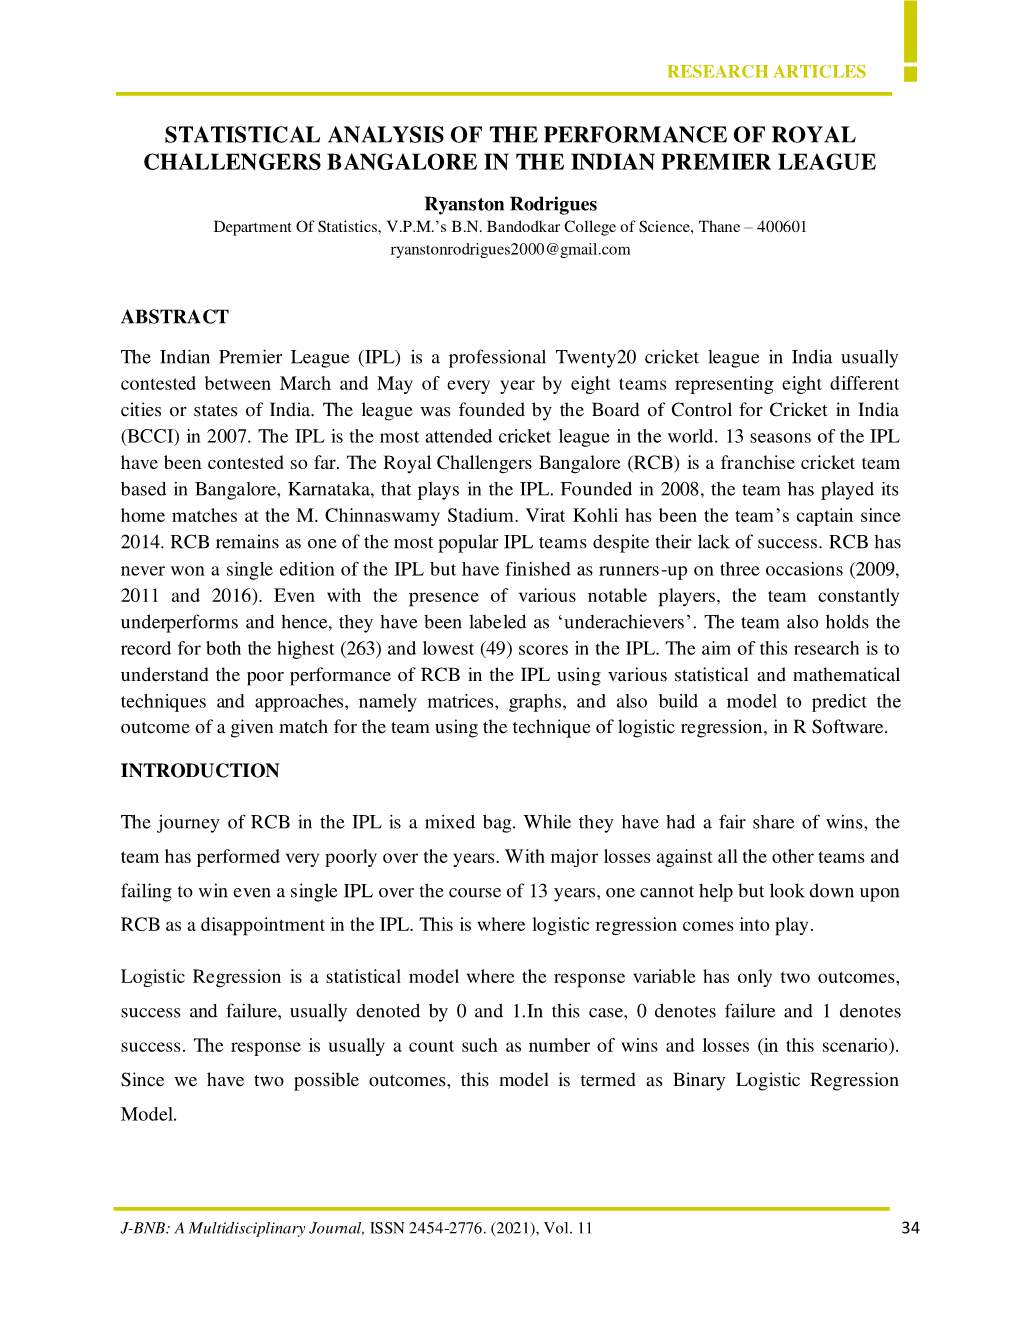 Statistical Analysis of the Performance of Royal Challengers Bangalore in the Indian Premier League